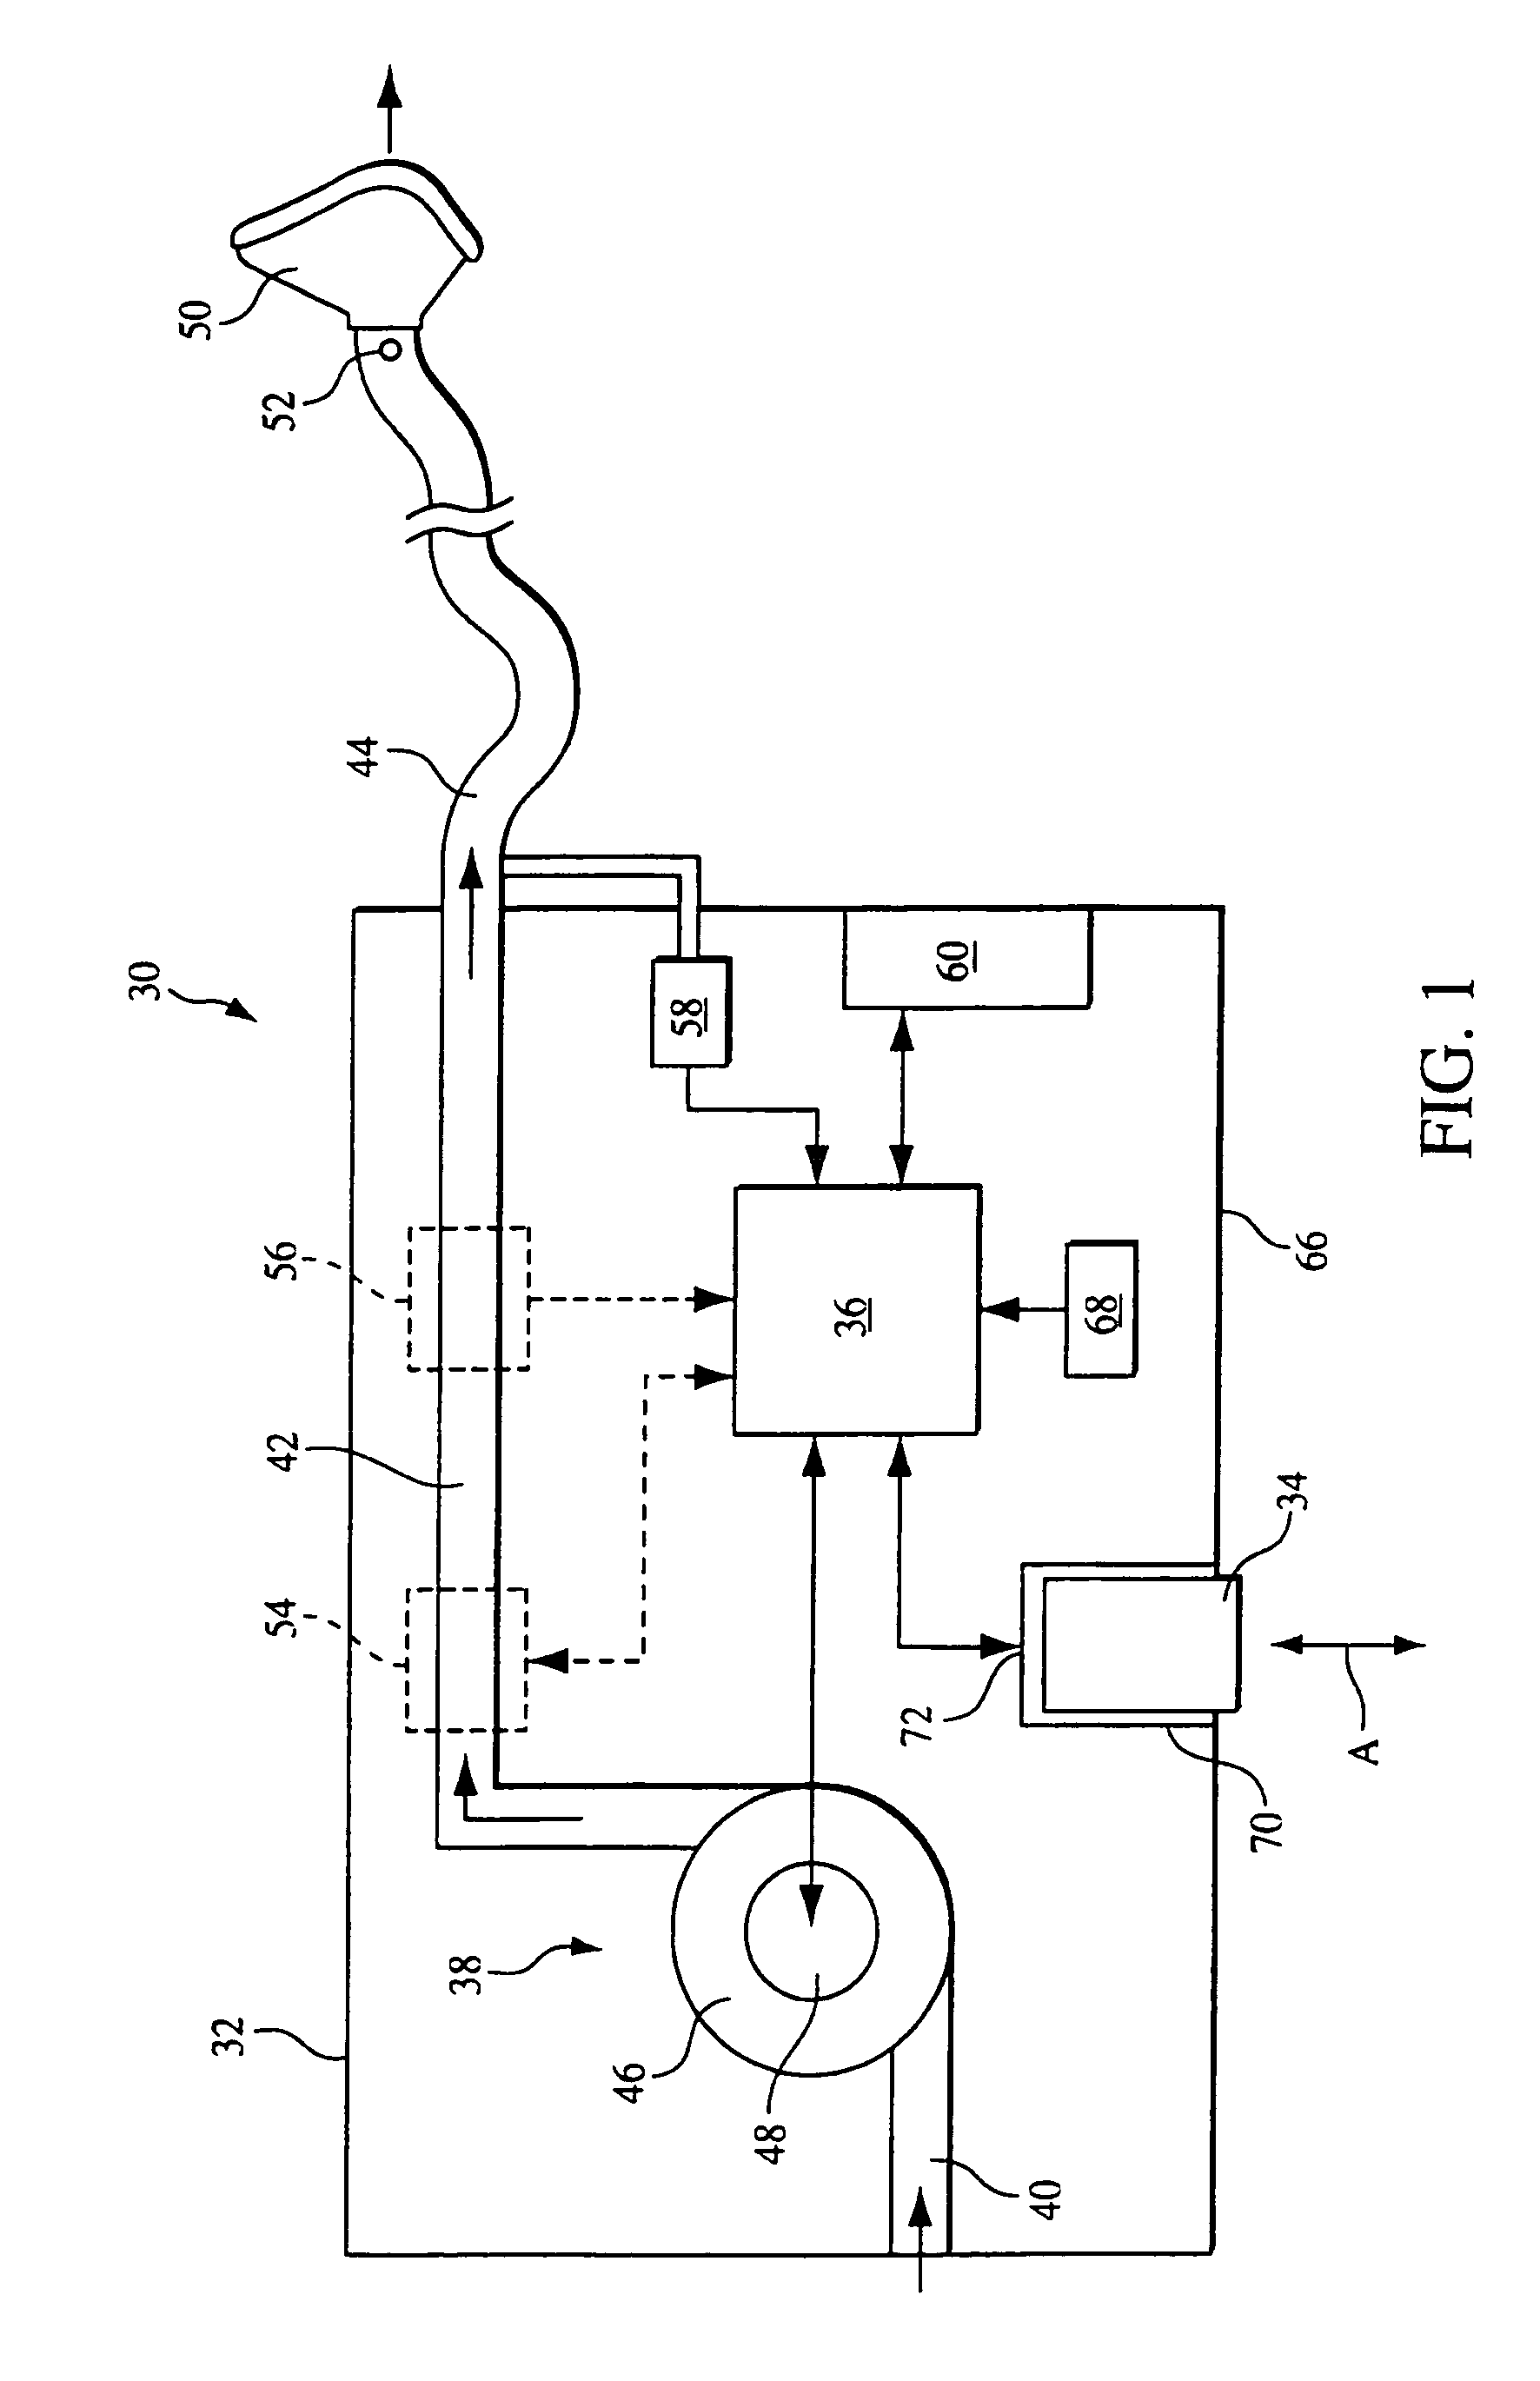 Method and apparatus for monitoring and controlling a medical device